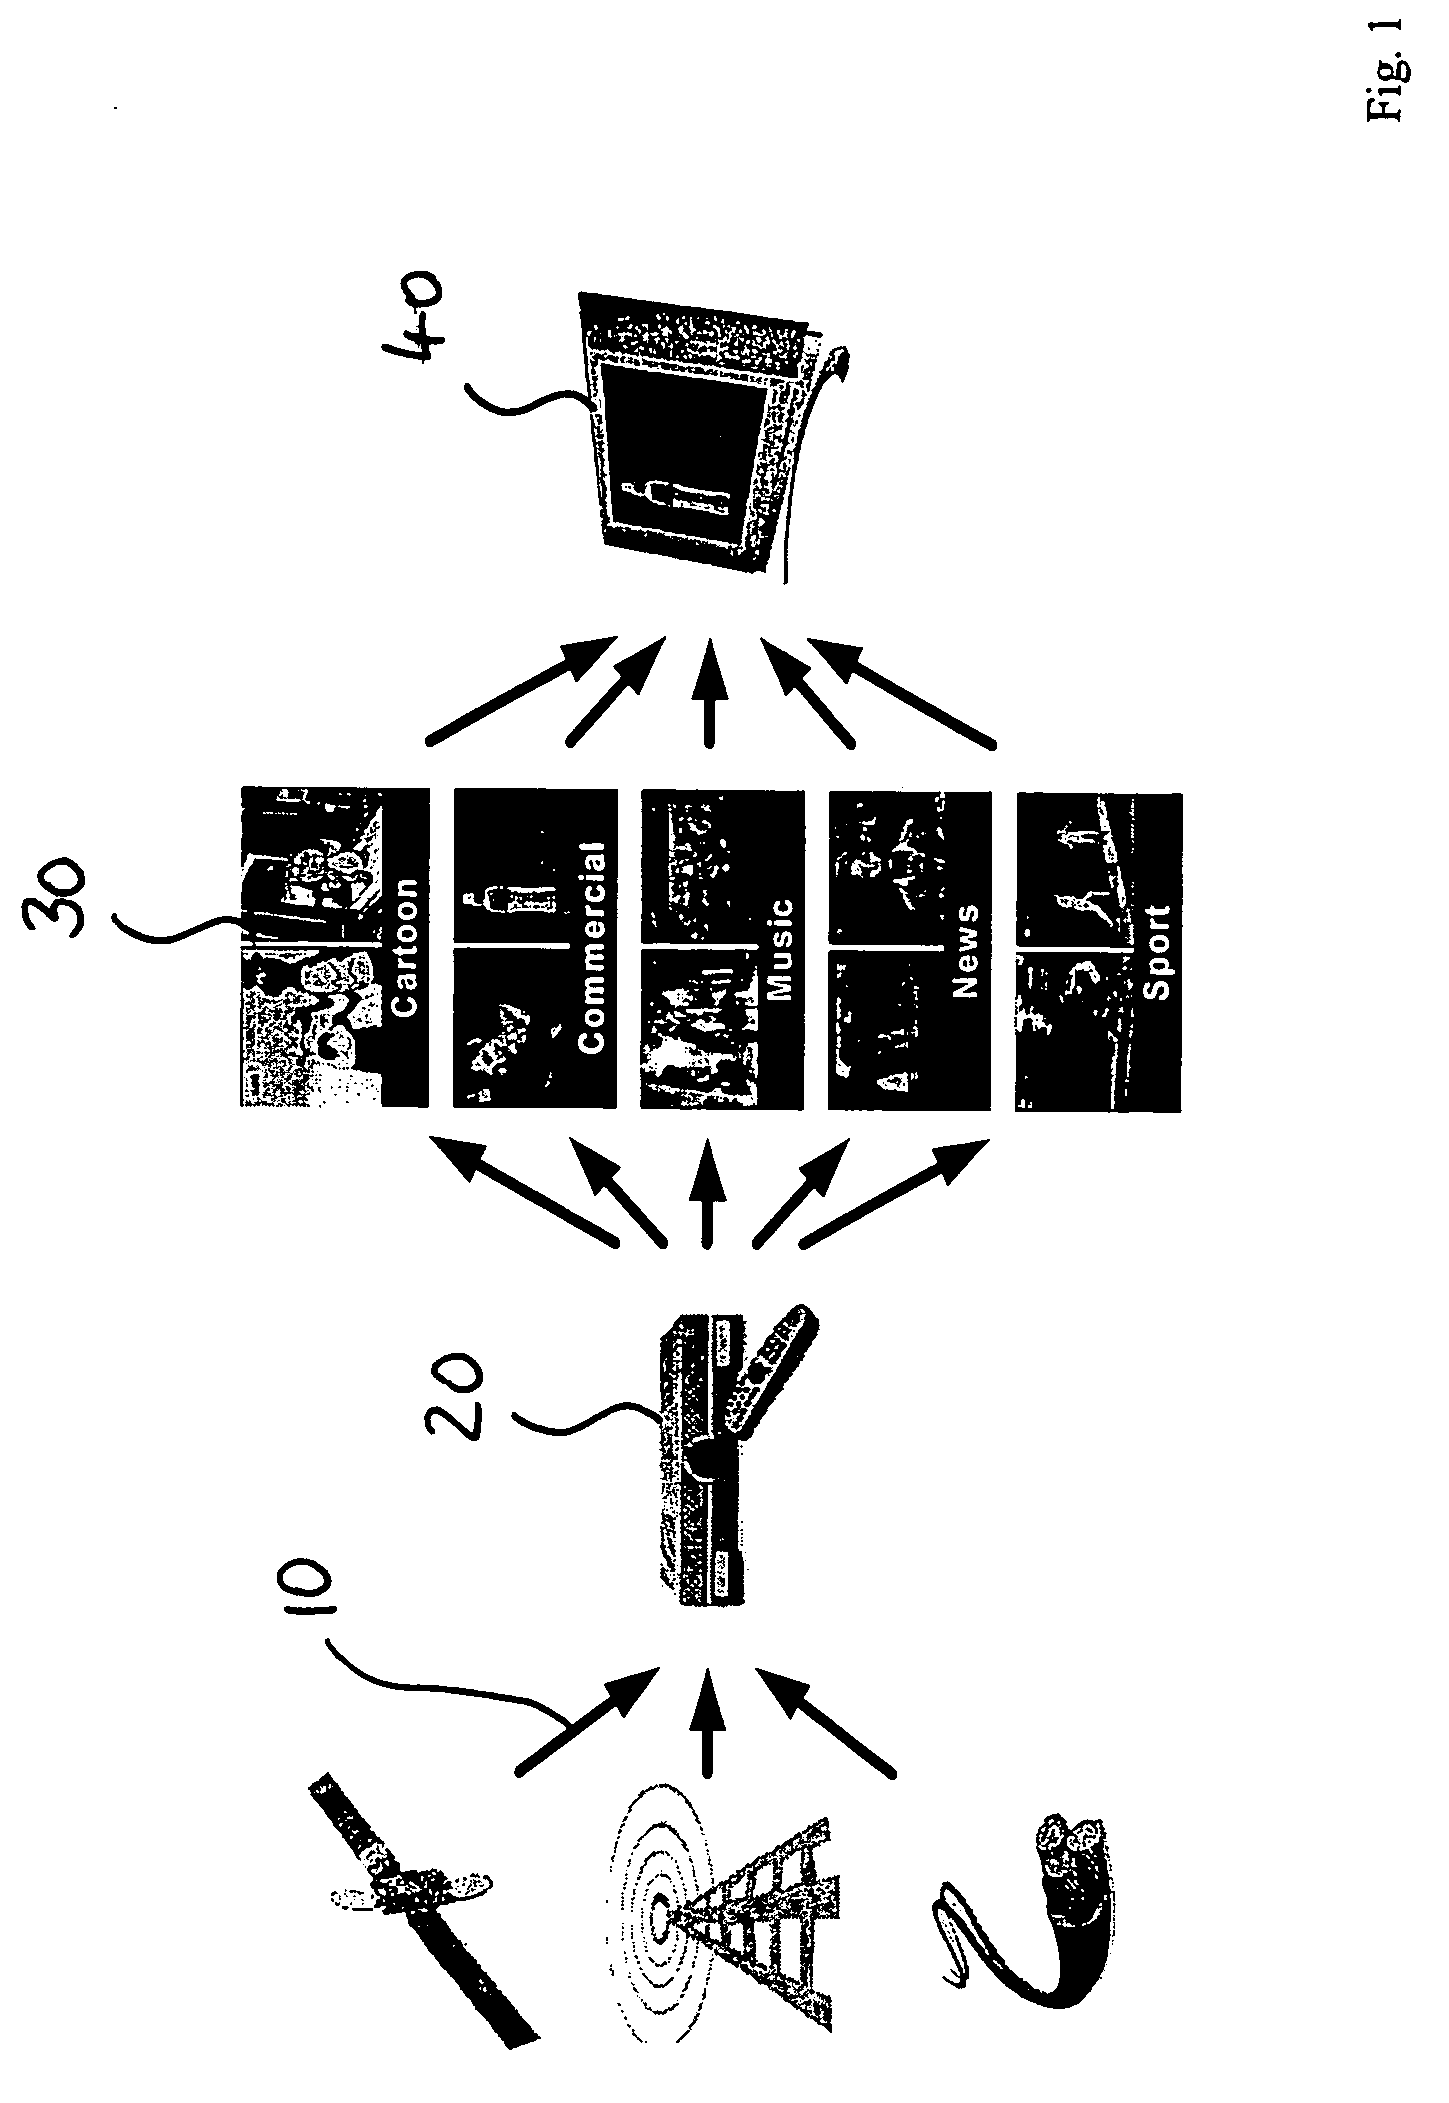 Method for detecting a commercial in a video data stream by evaluating descriptor information